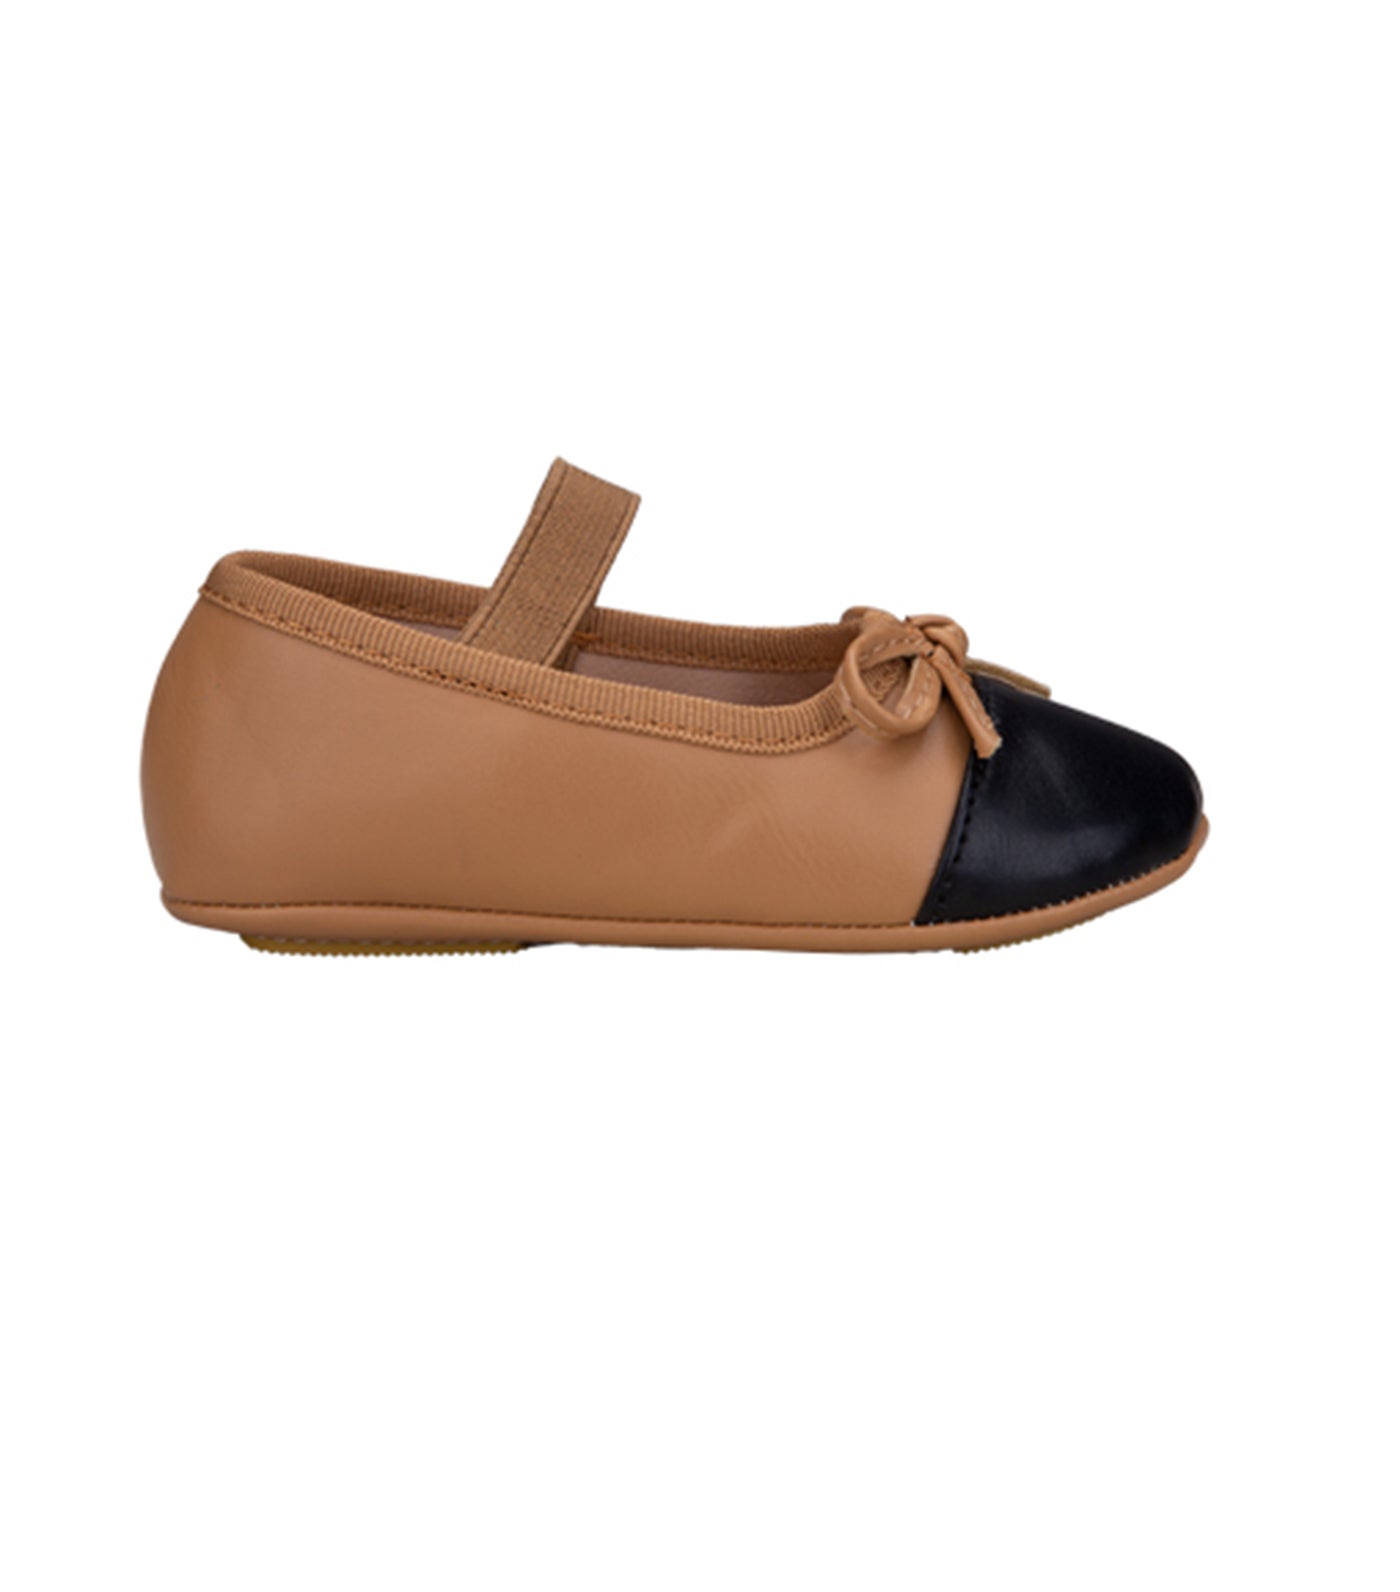 Tai Mary Janes for Toddlers and Kids - Tan and Black